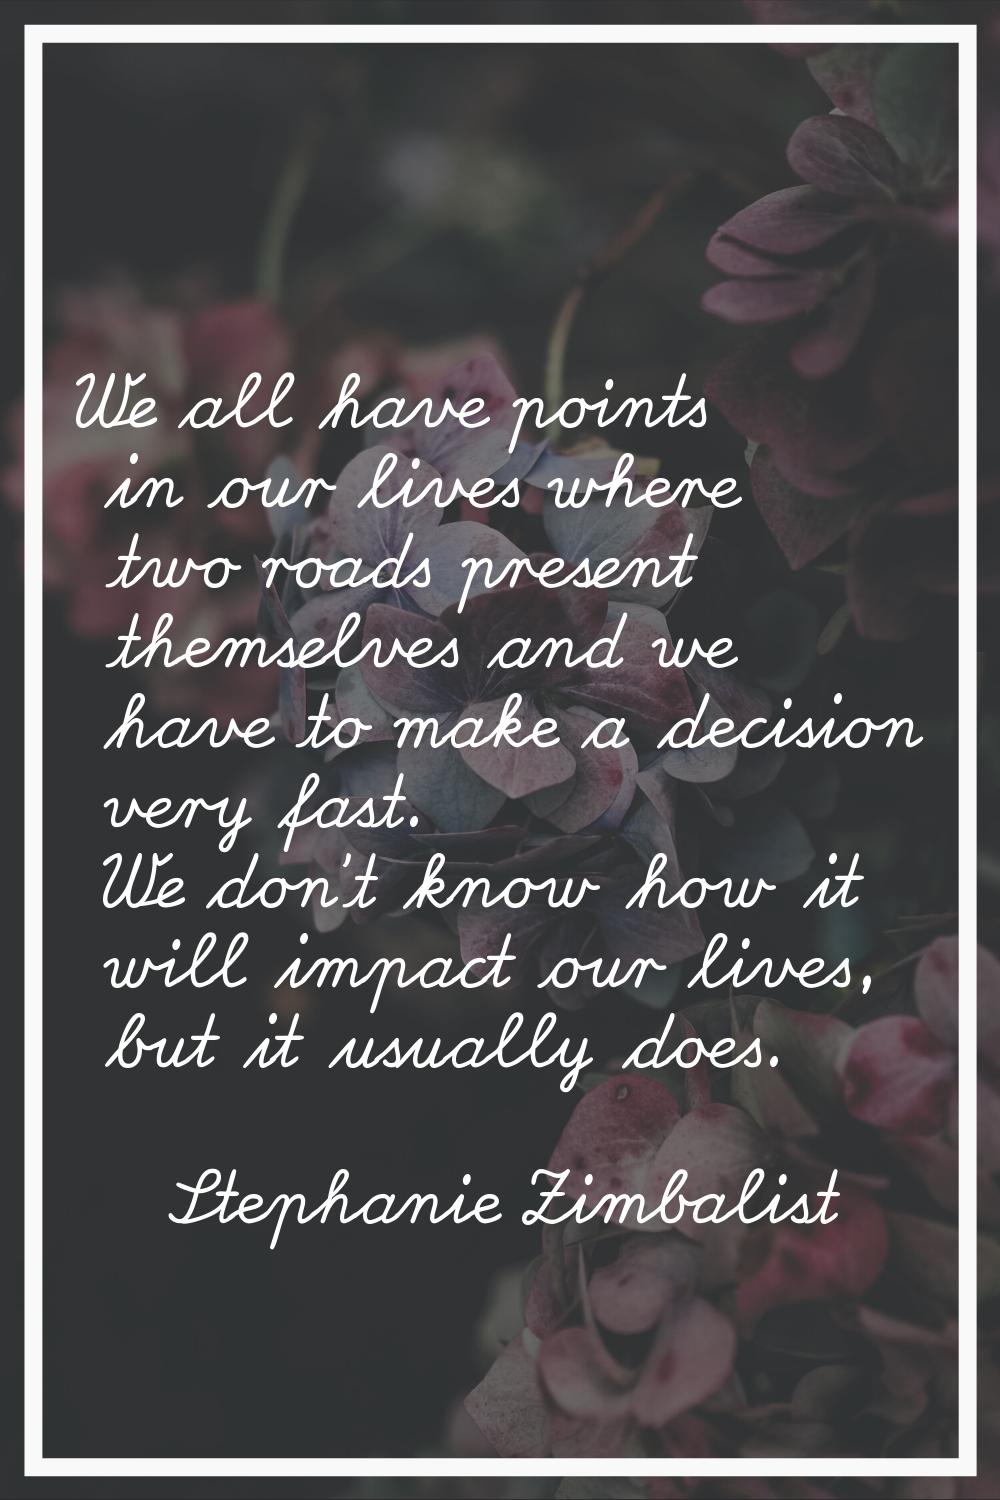 We all have points in our lives where two roads present themselves and we have to make a decision v